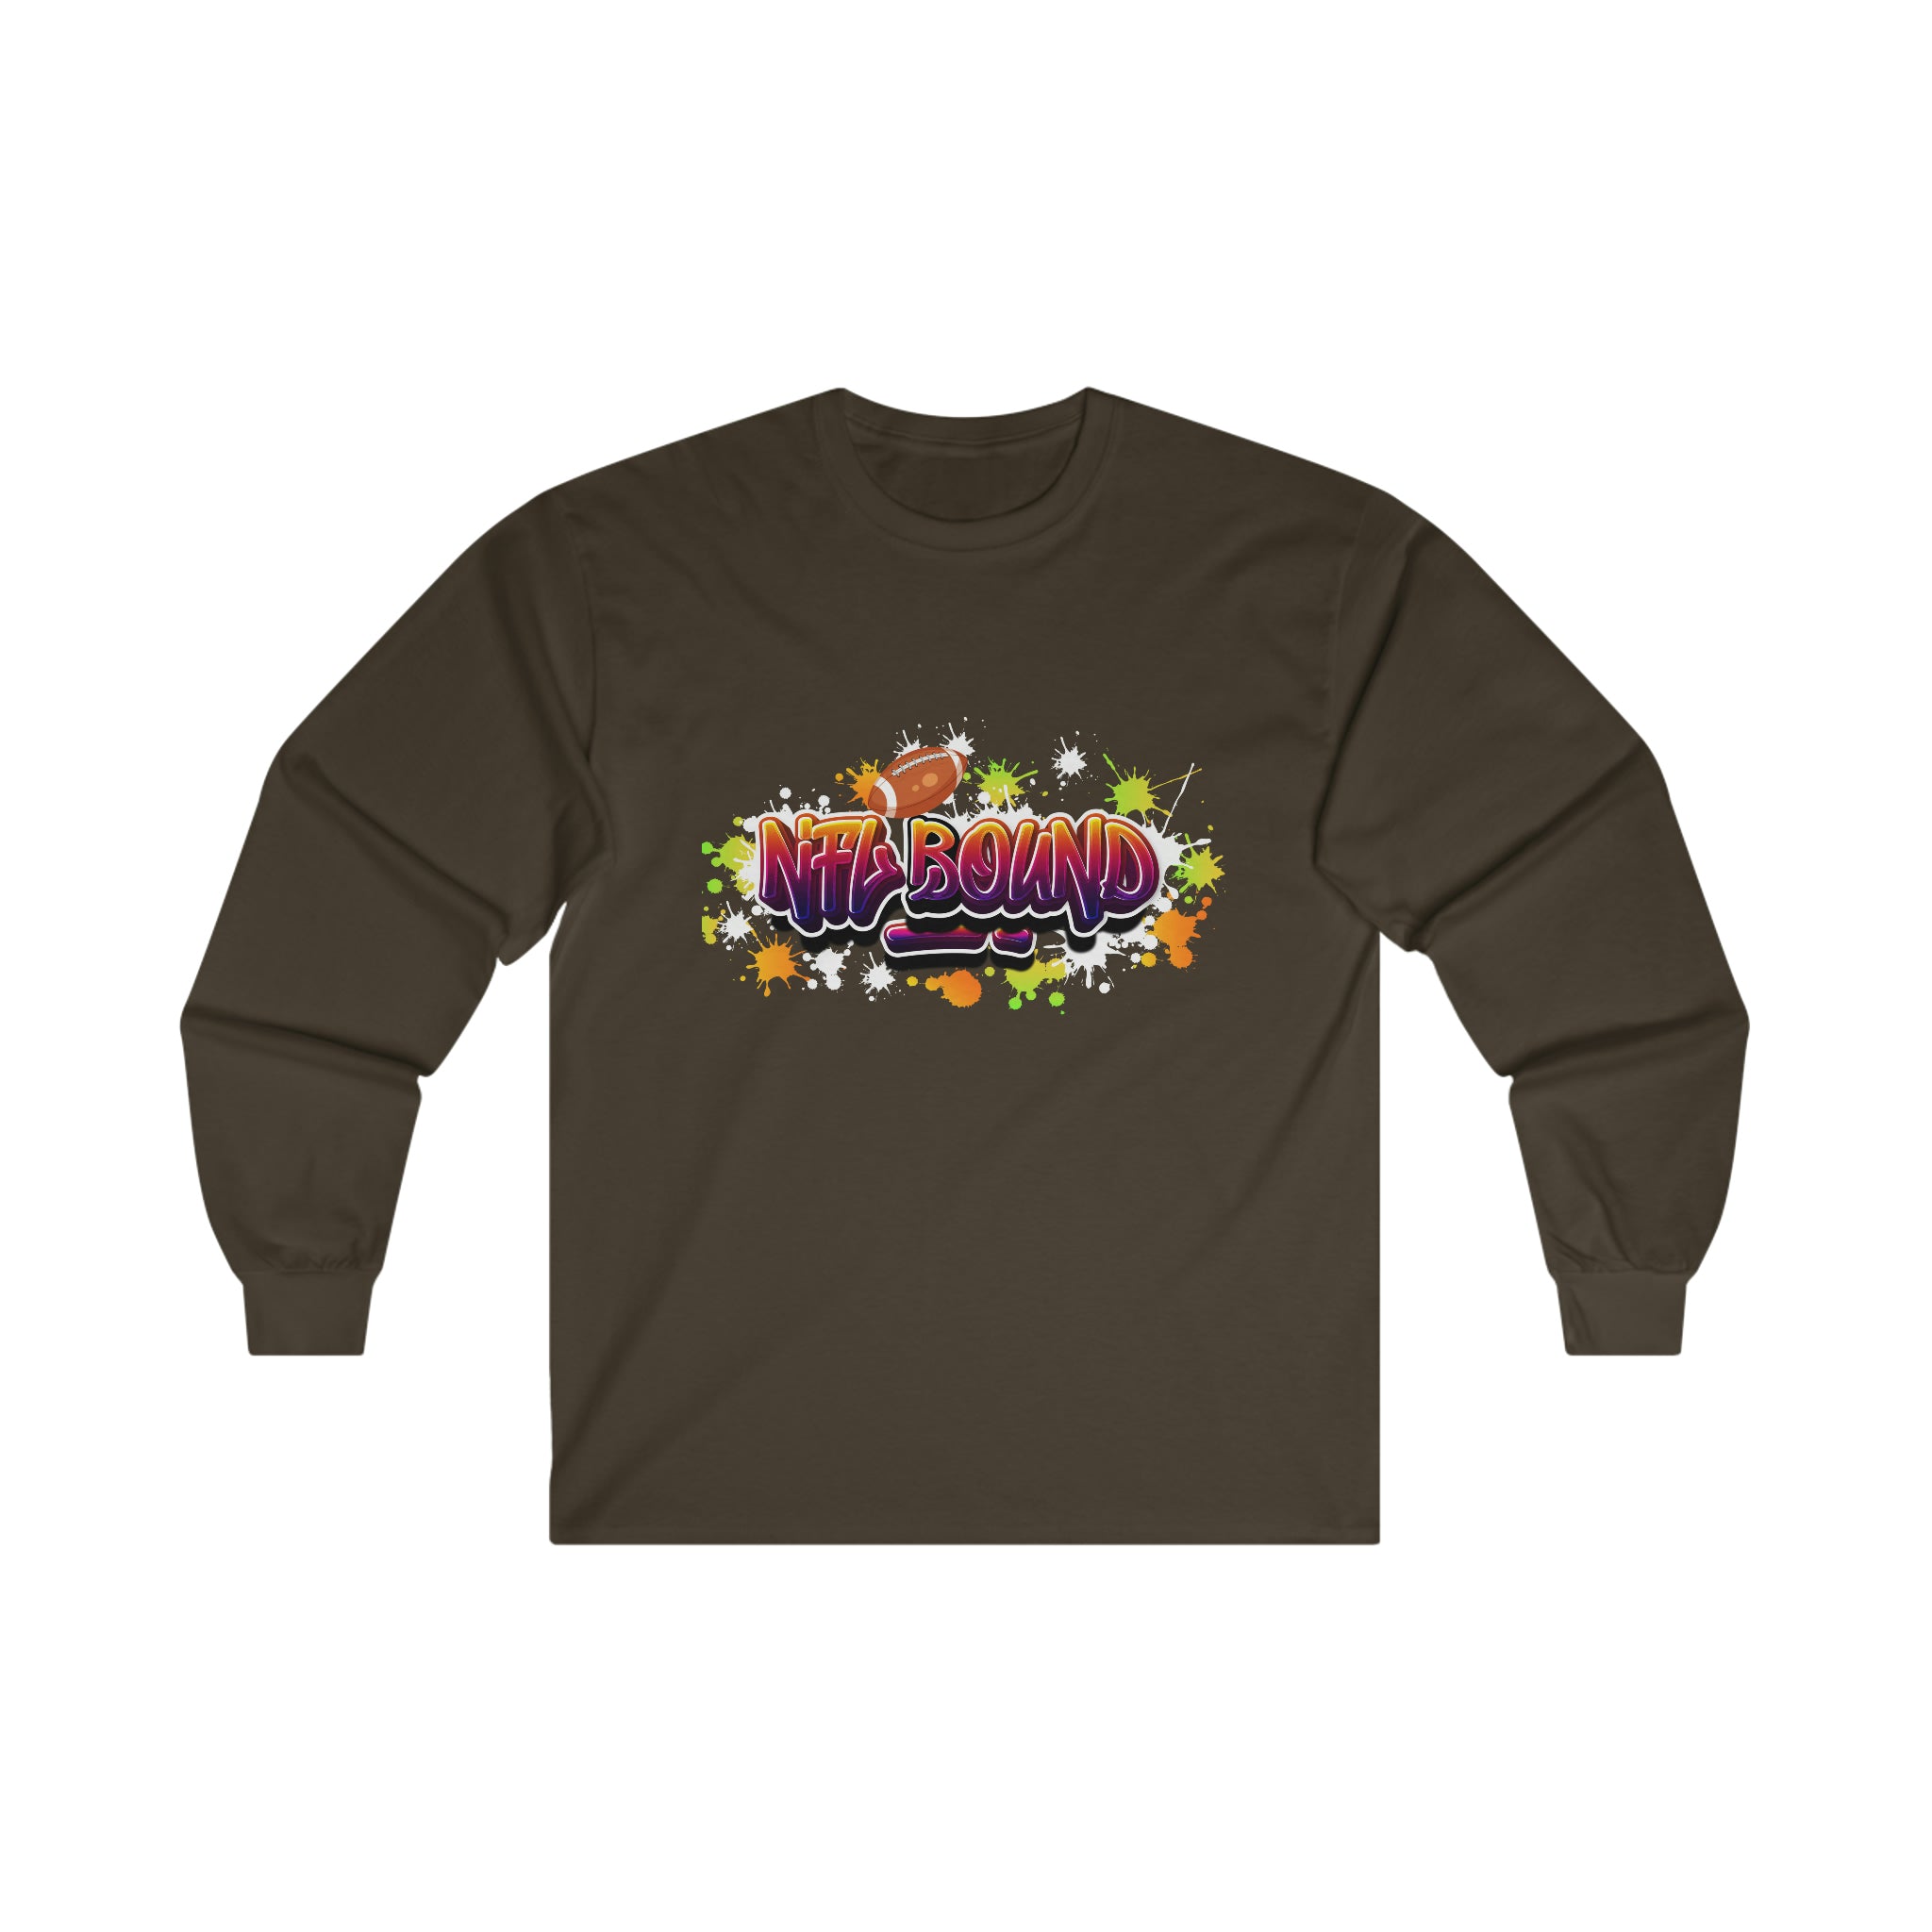 NFL Bound Cotton Long Sleeve Tee